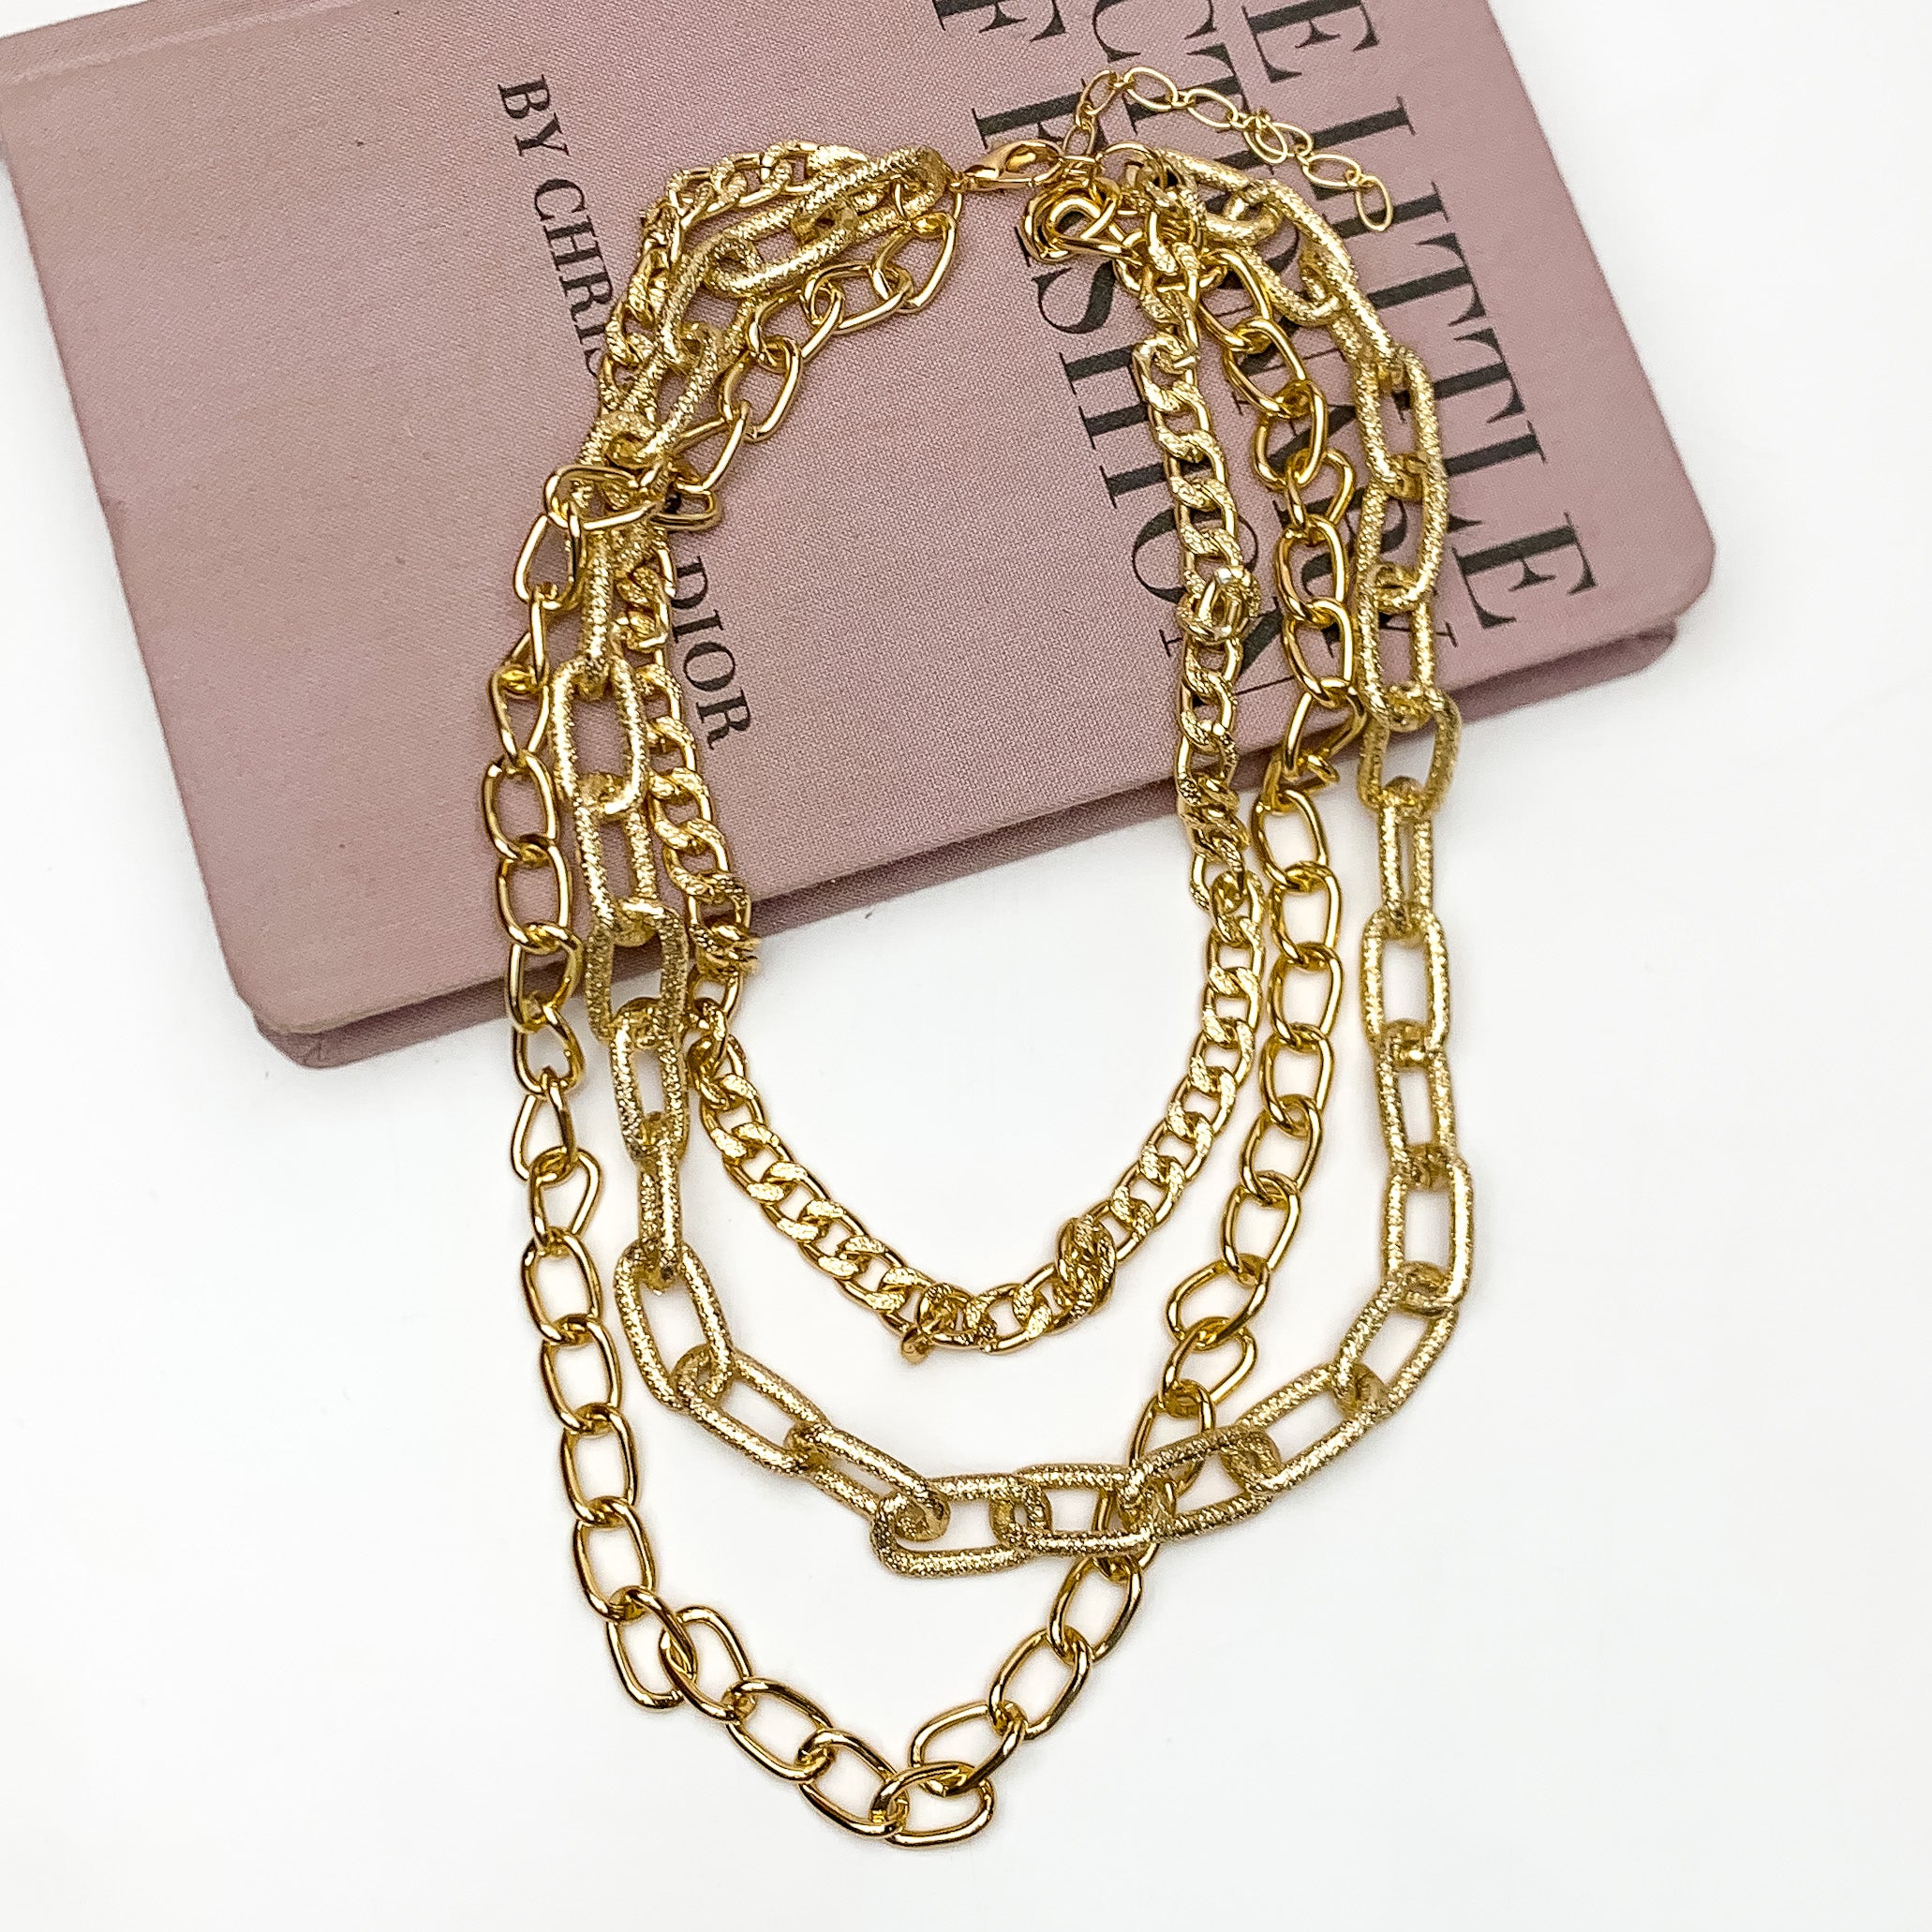 Balcony Brunch Multi Strand Chain Necklace in Gold Tone - Giddy Up Glamour Boutique